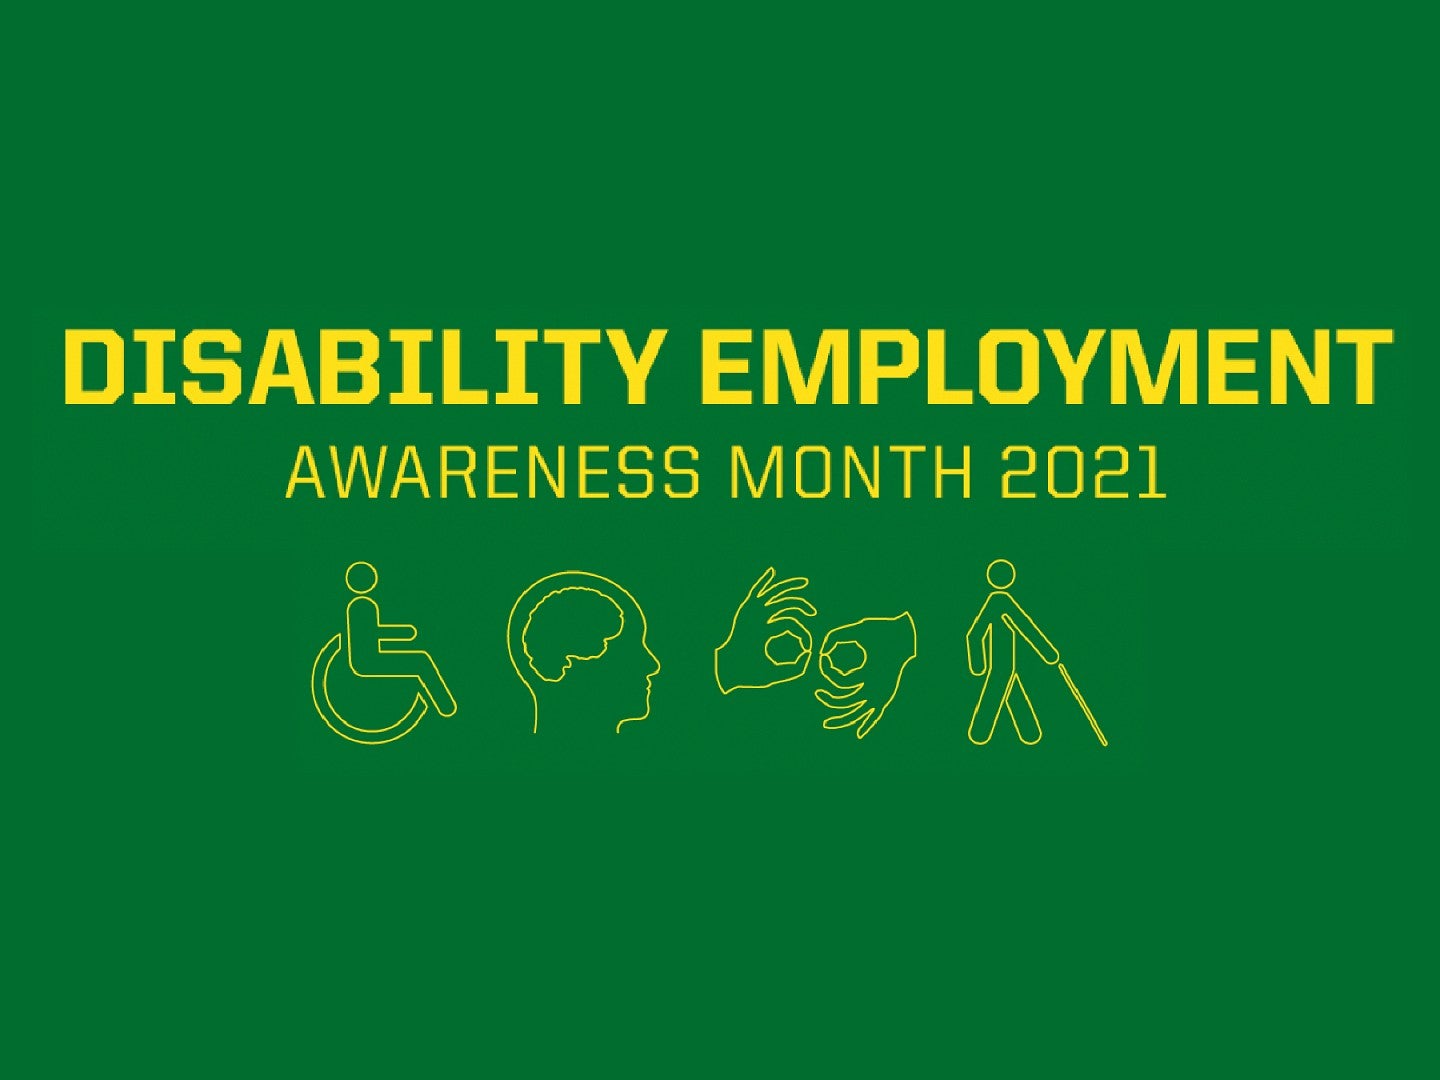 Green background with disability employment awareness month 2021 witten on top of four disability symbols